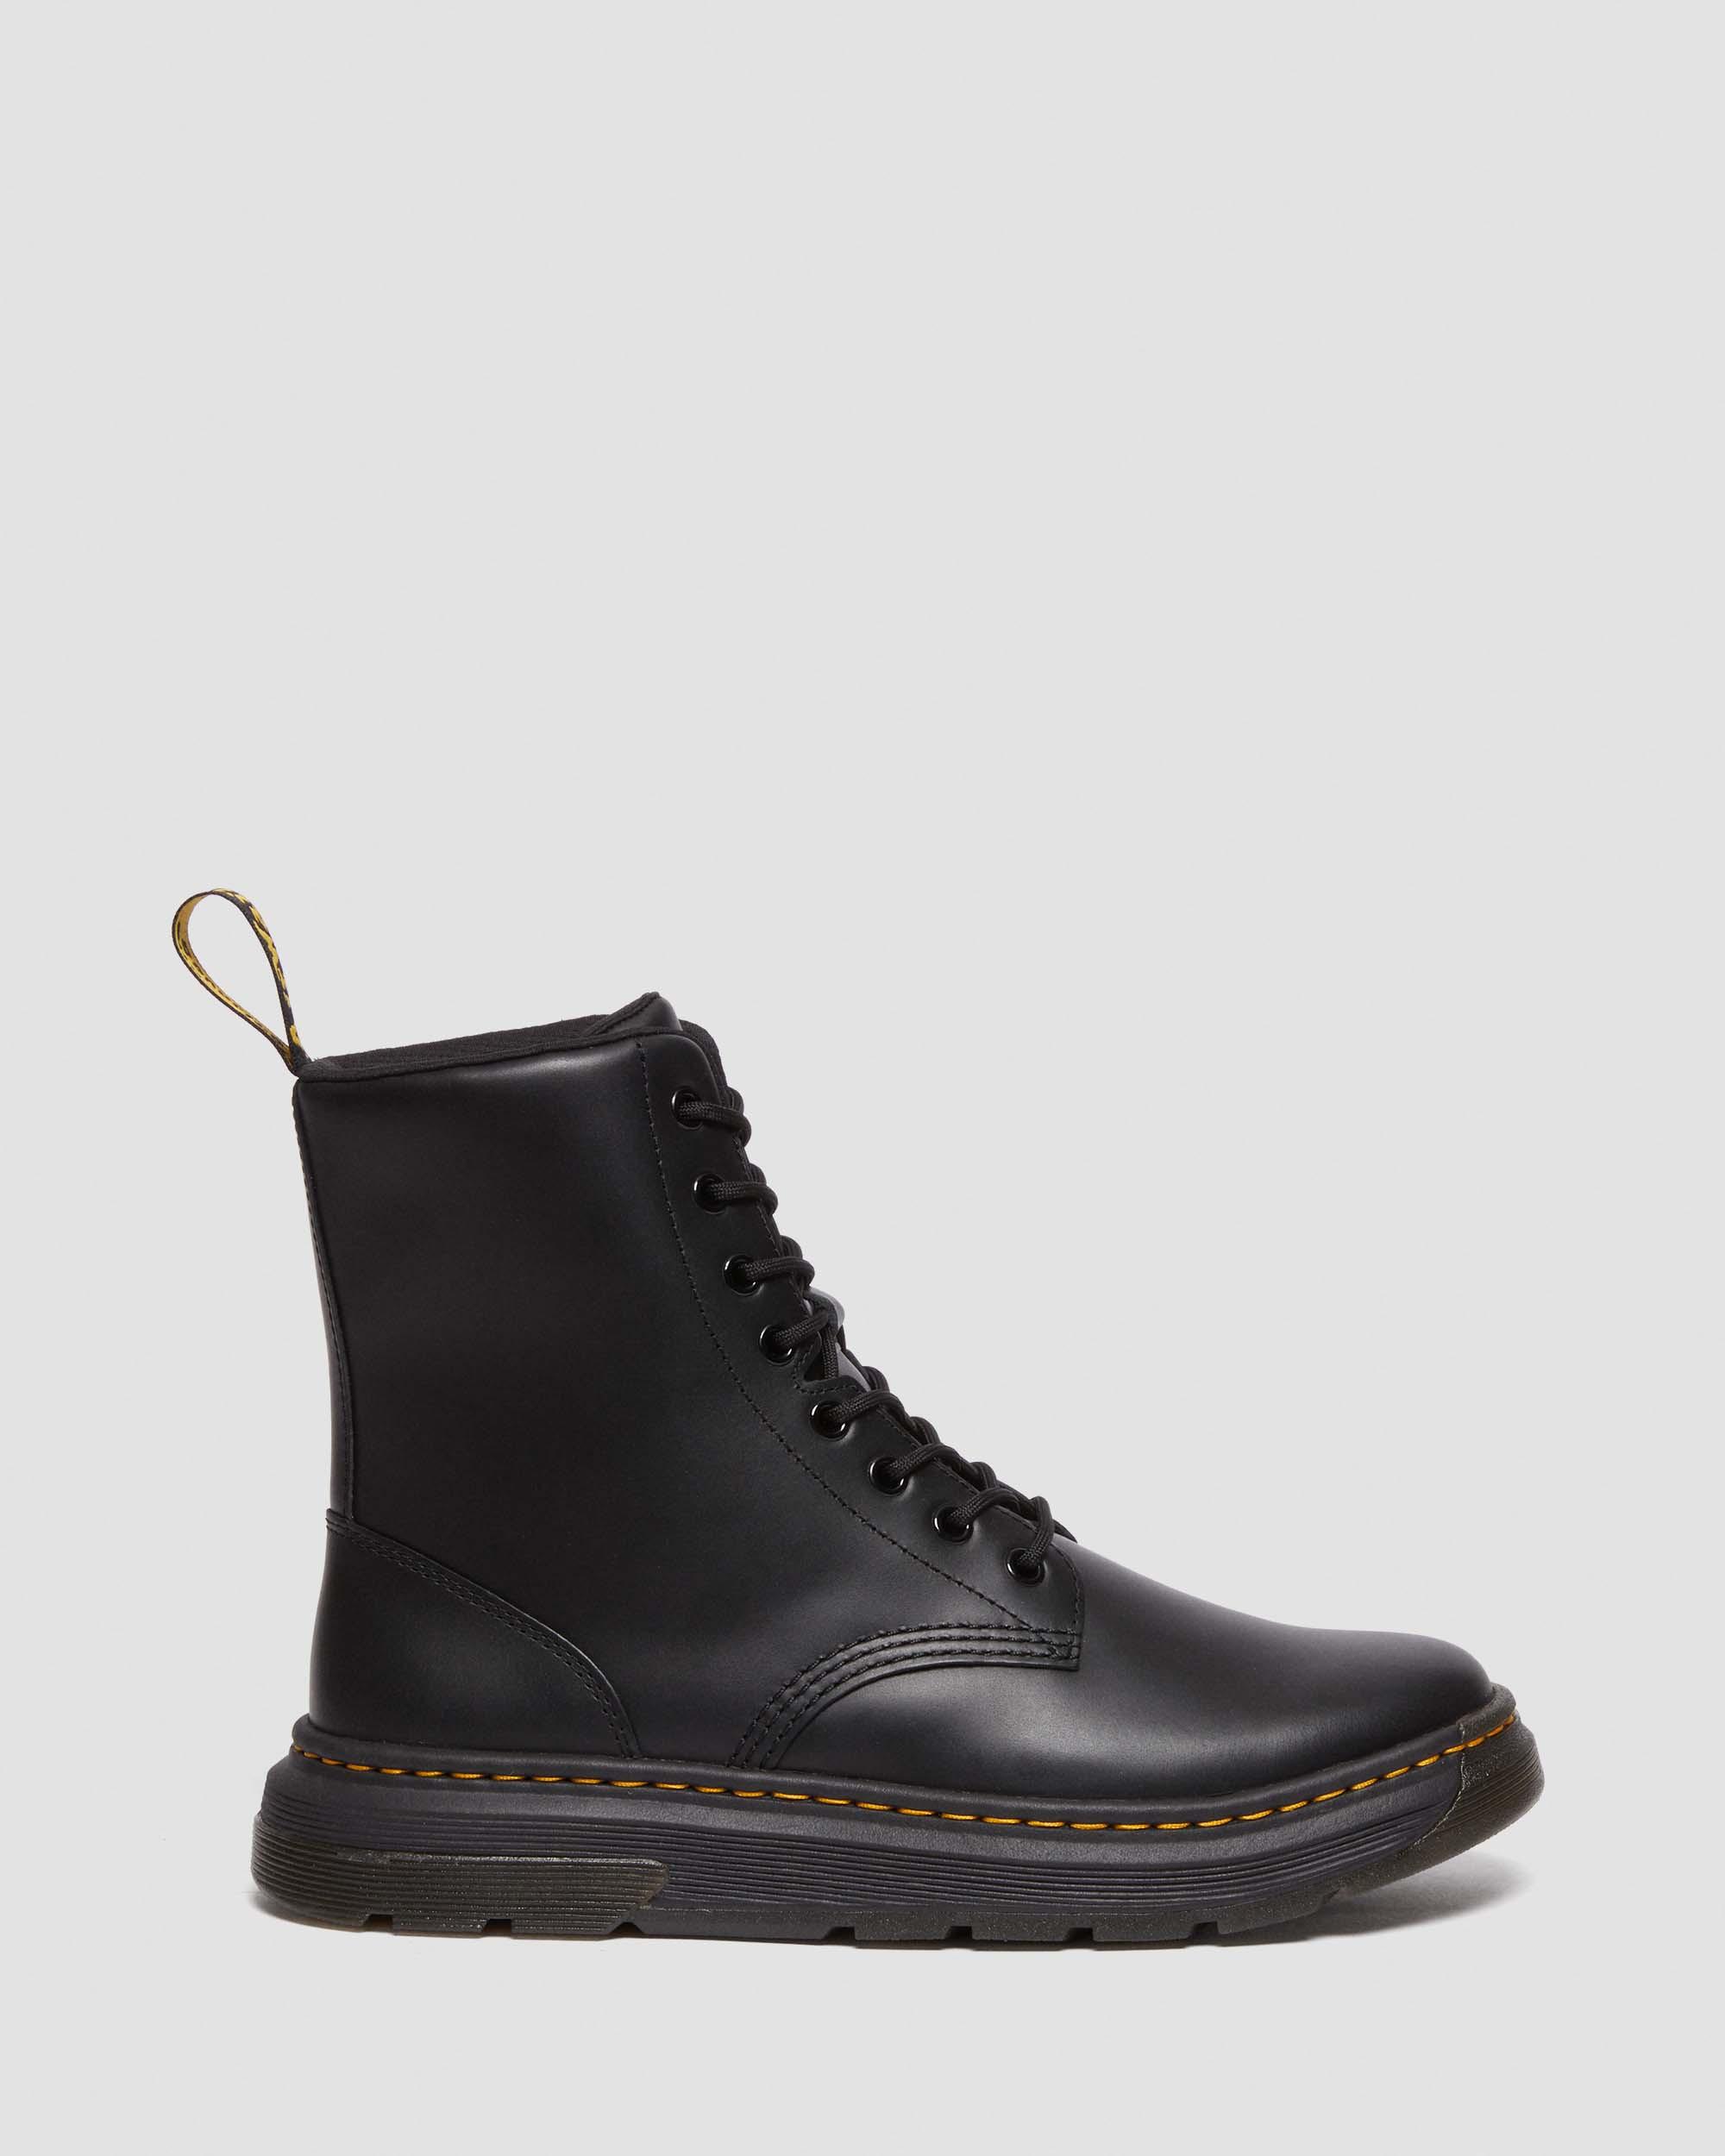 Crewson Leather Lace Up Boots in BLACK